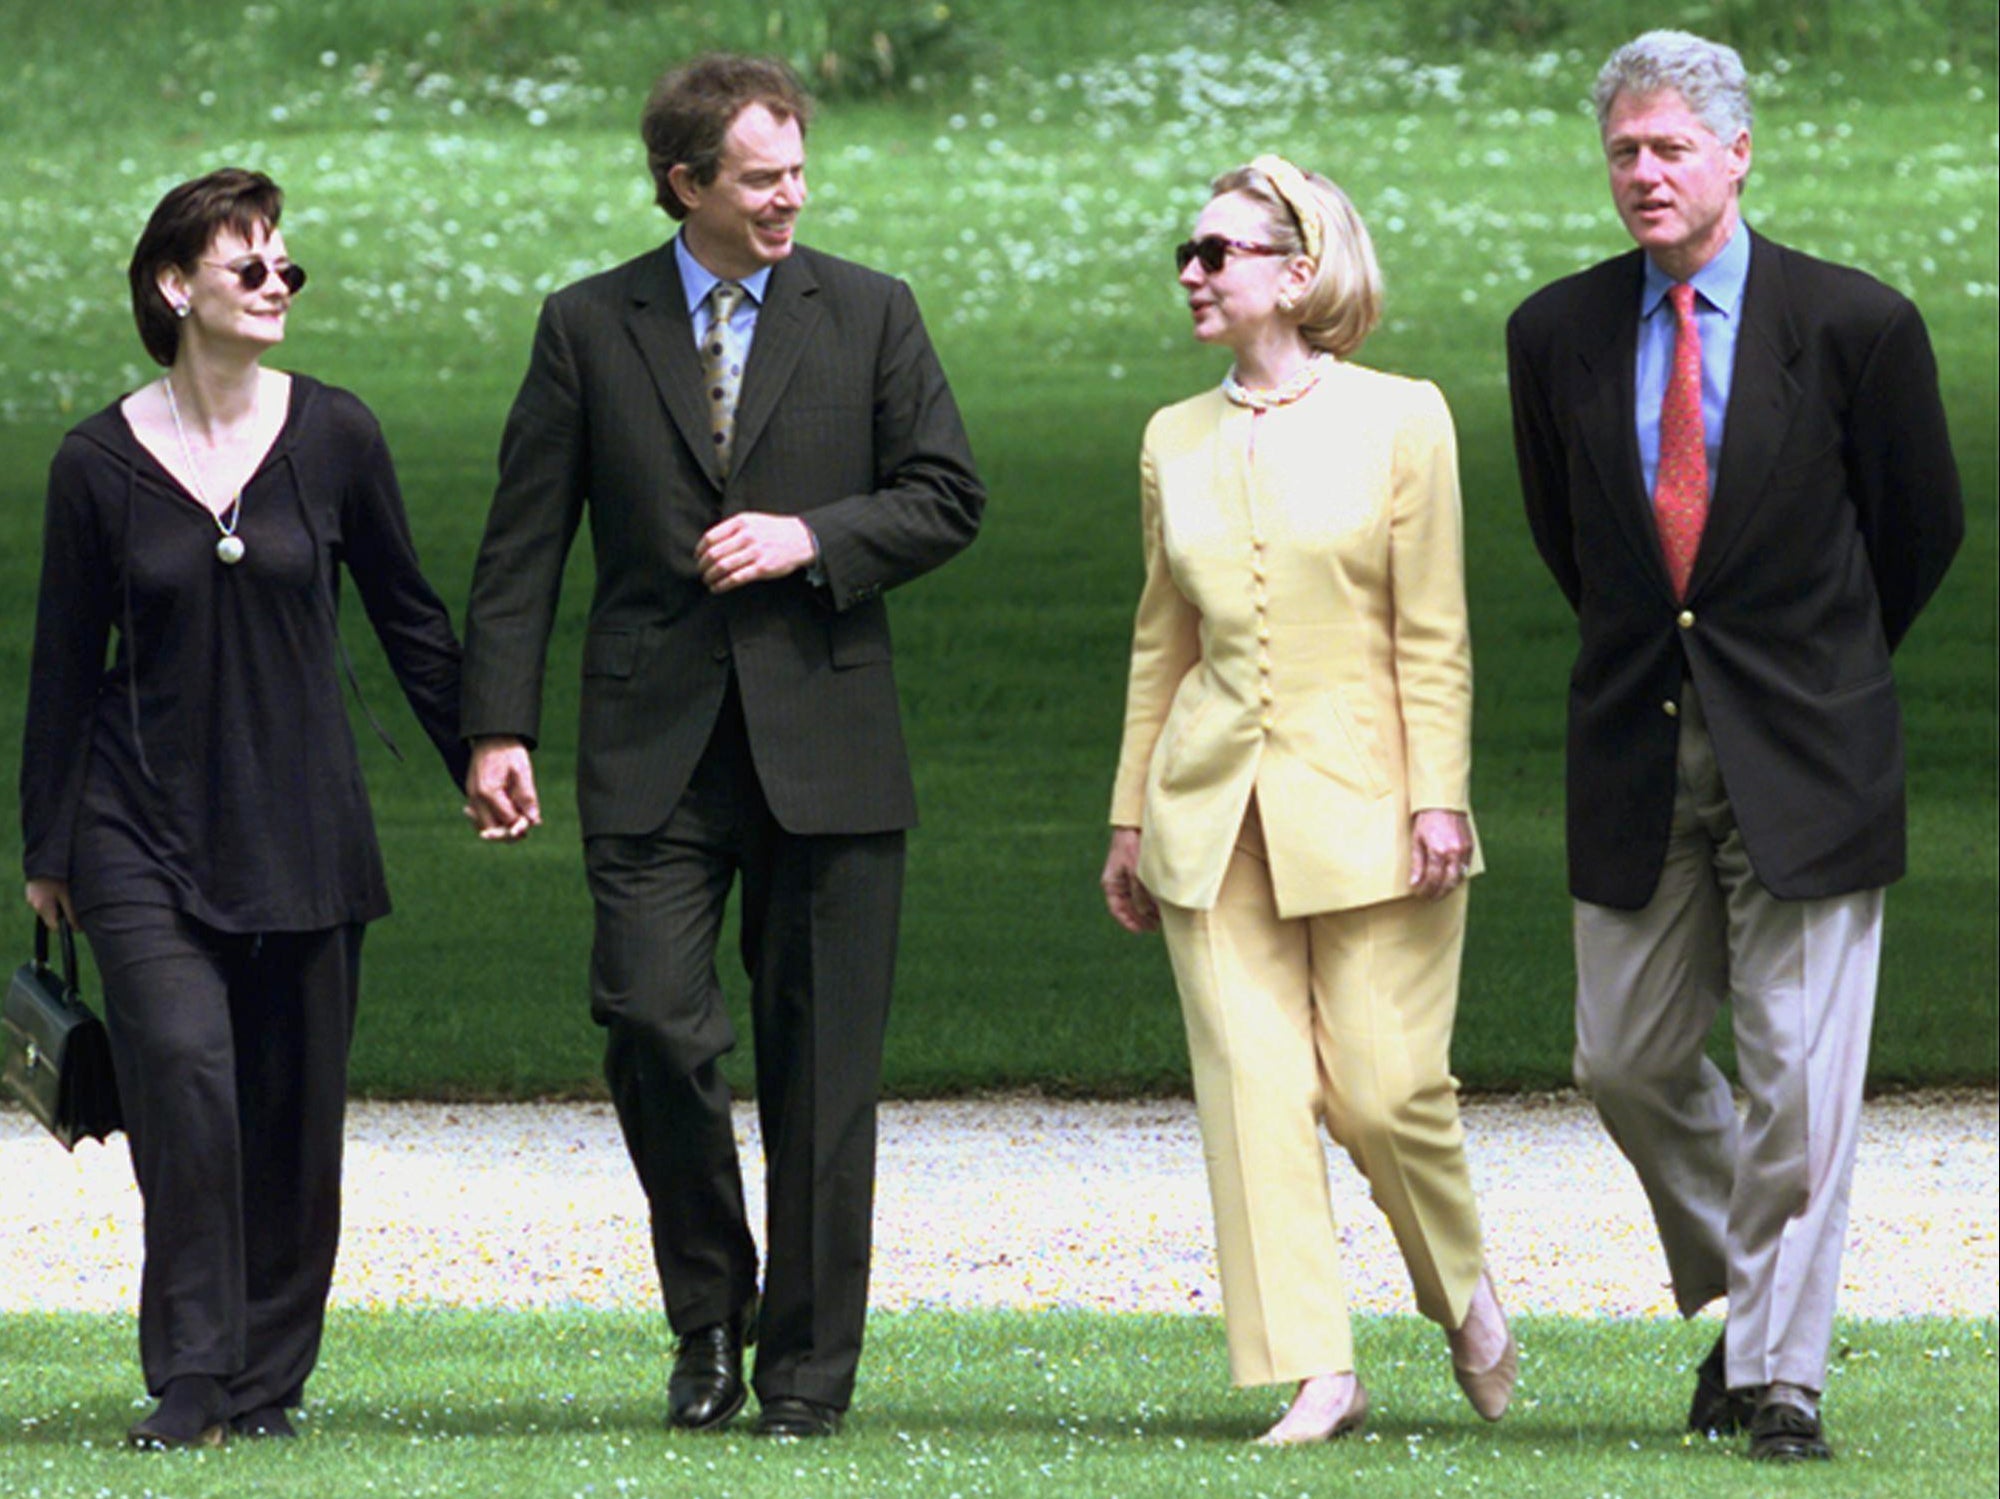 Tony Blair and his wife Cherie (L), and Hillary Clinton and Bill Clinton at the G8 summit in 1998